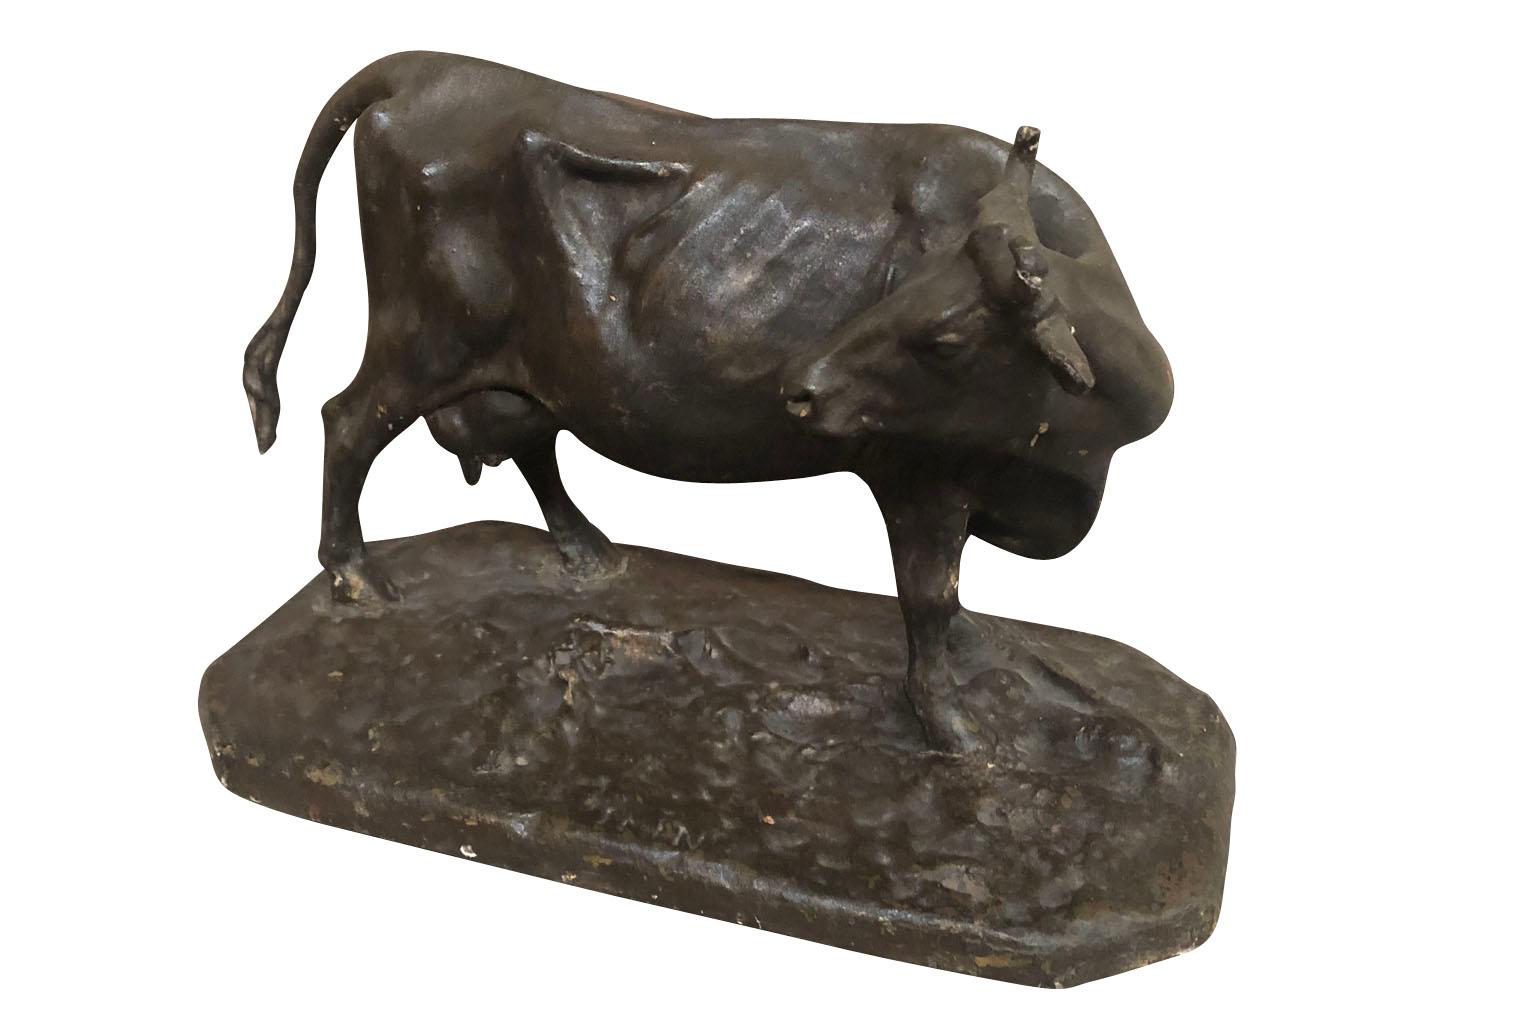 A very handsome later 19th century statue of a cow wonderfully constructed from papier mâché. A wonderful piece for any bookcase or table top.